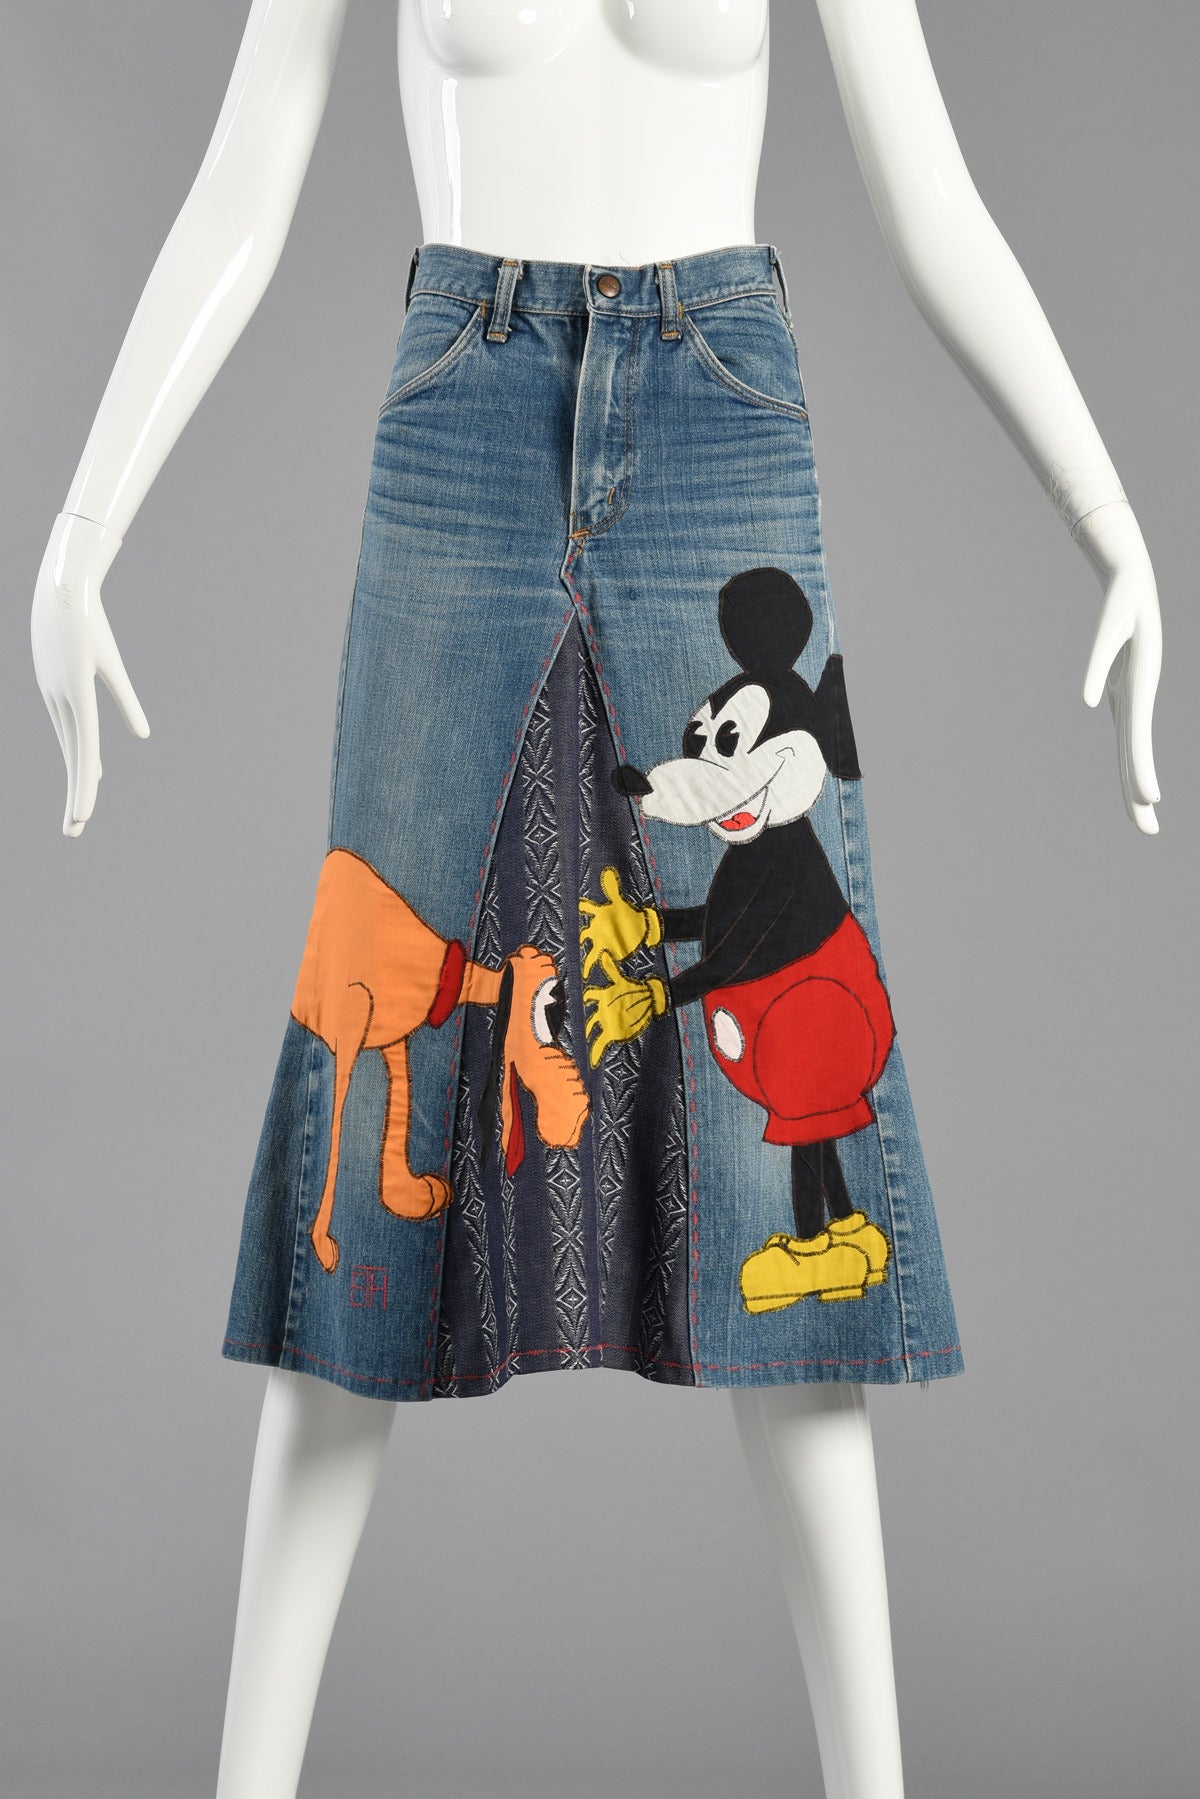 Incredible hand made 1960s Mickey Mouse and Pluto denim skirt by the world famous Serendipity 3 line out of New York City. 

Of course everyone knows the iconic restaurant with their famous frozen peanut butter hot chocolate but what’s lesser